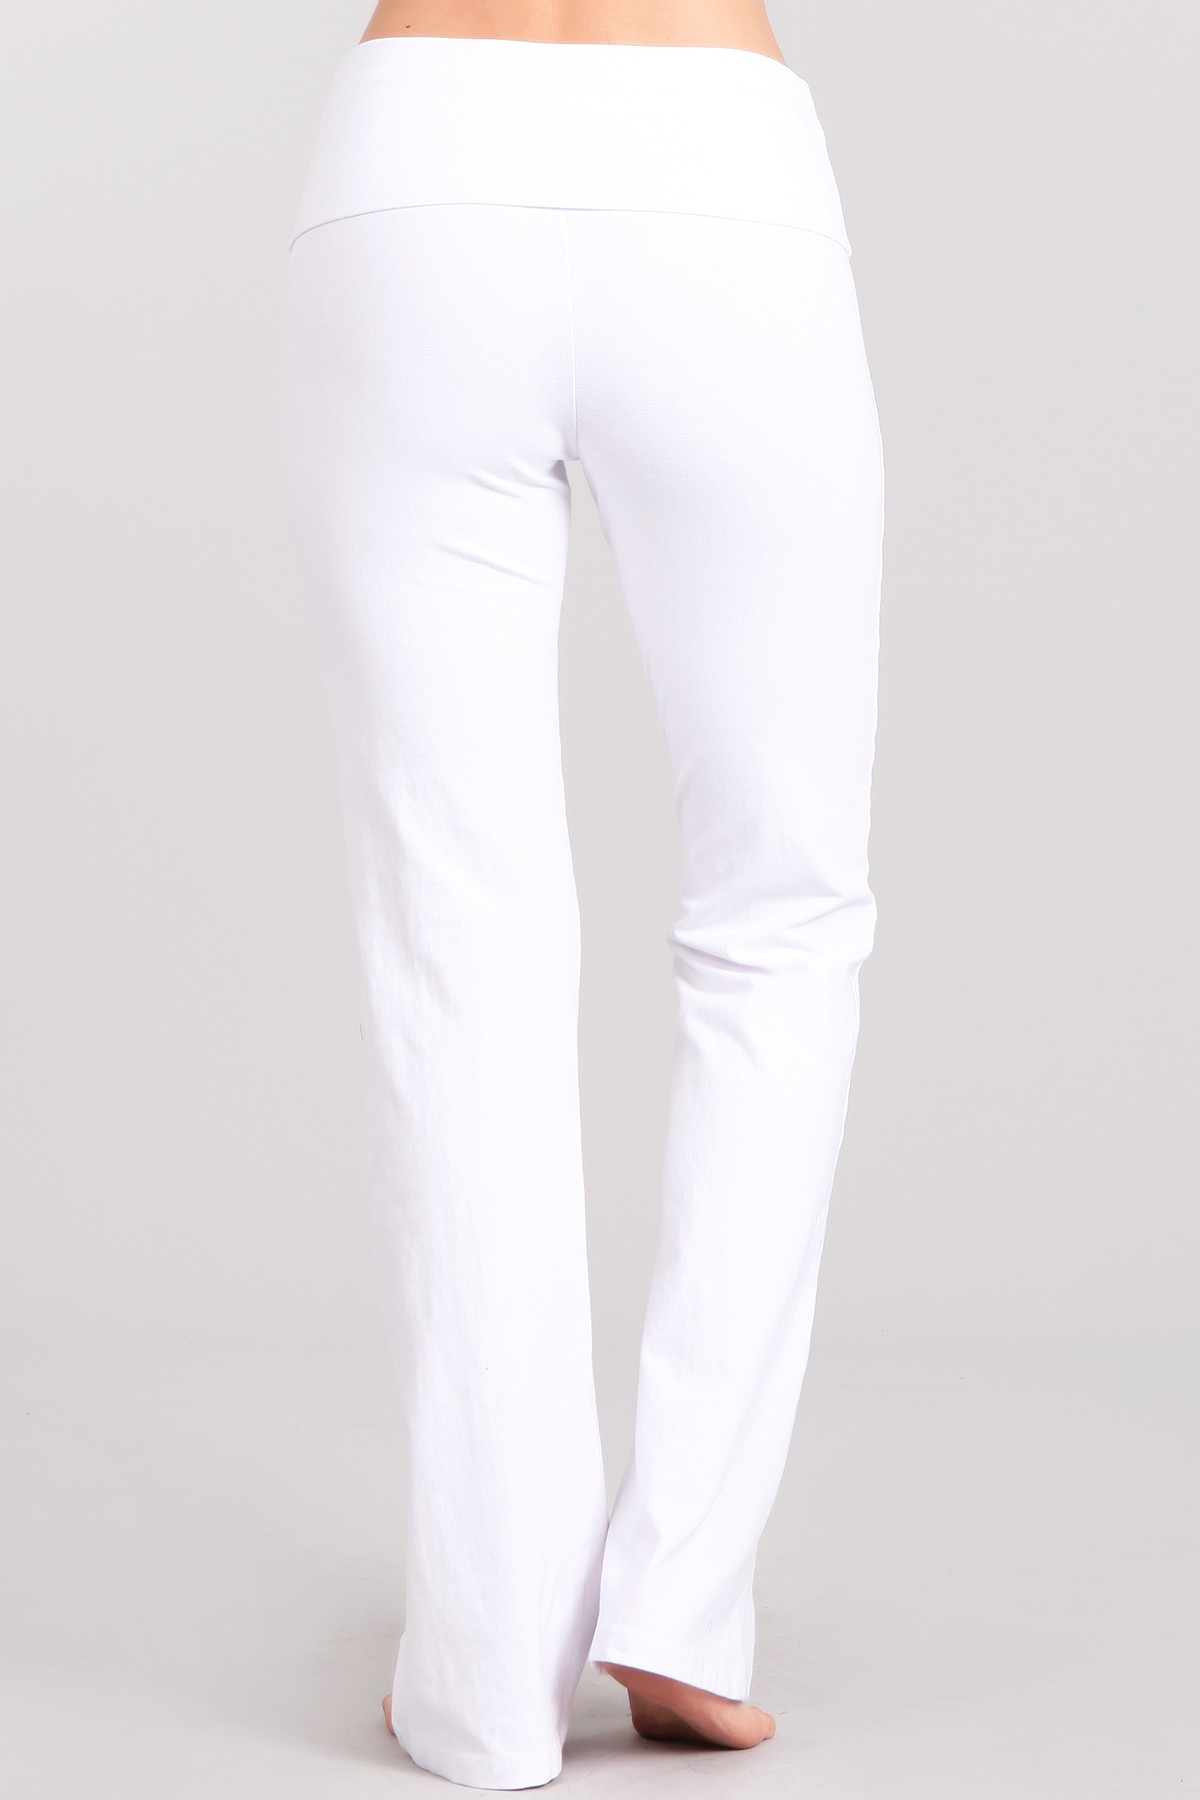 2Chique Boutique Women's White Mineral Washed Boot Cut Pants with Fold Over Waistband - image 3 of 4